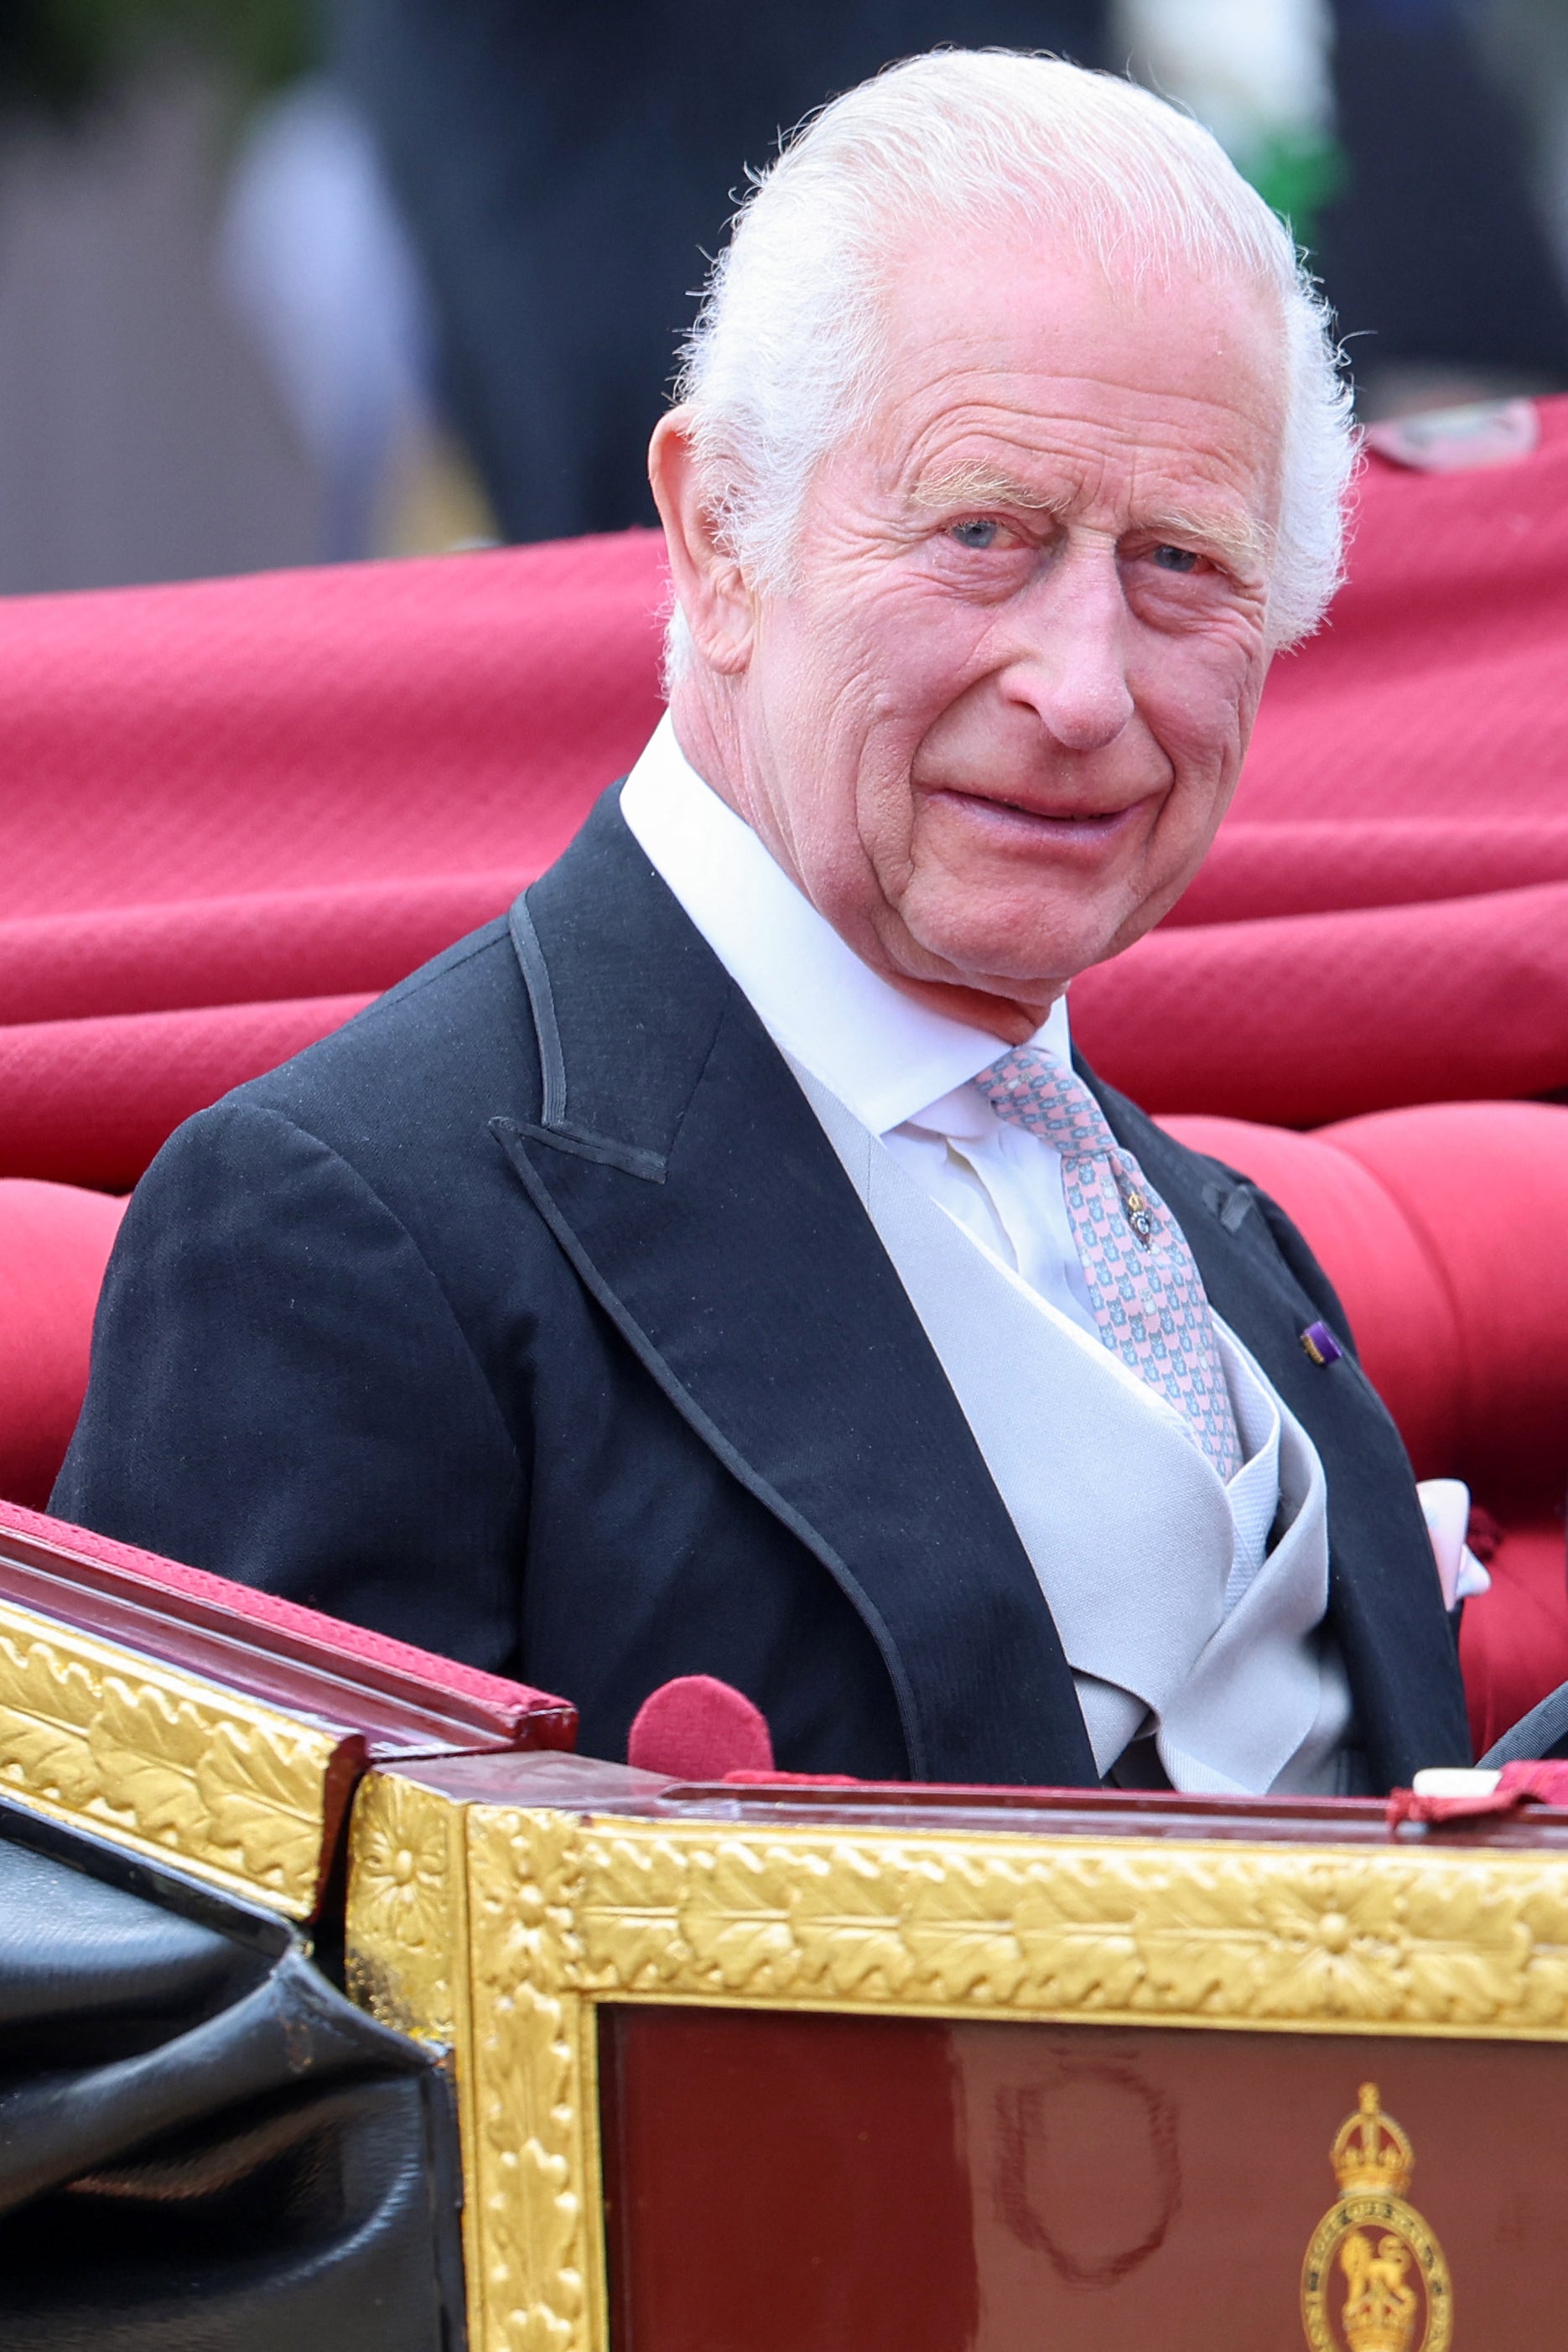 The States of Jersey will be enjoying a bank holiday on 15 July to mark King Charles’s upcoming visit.